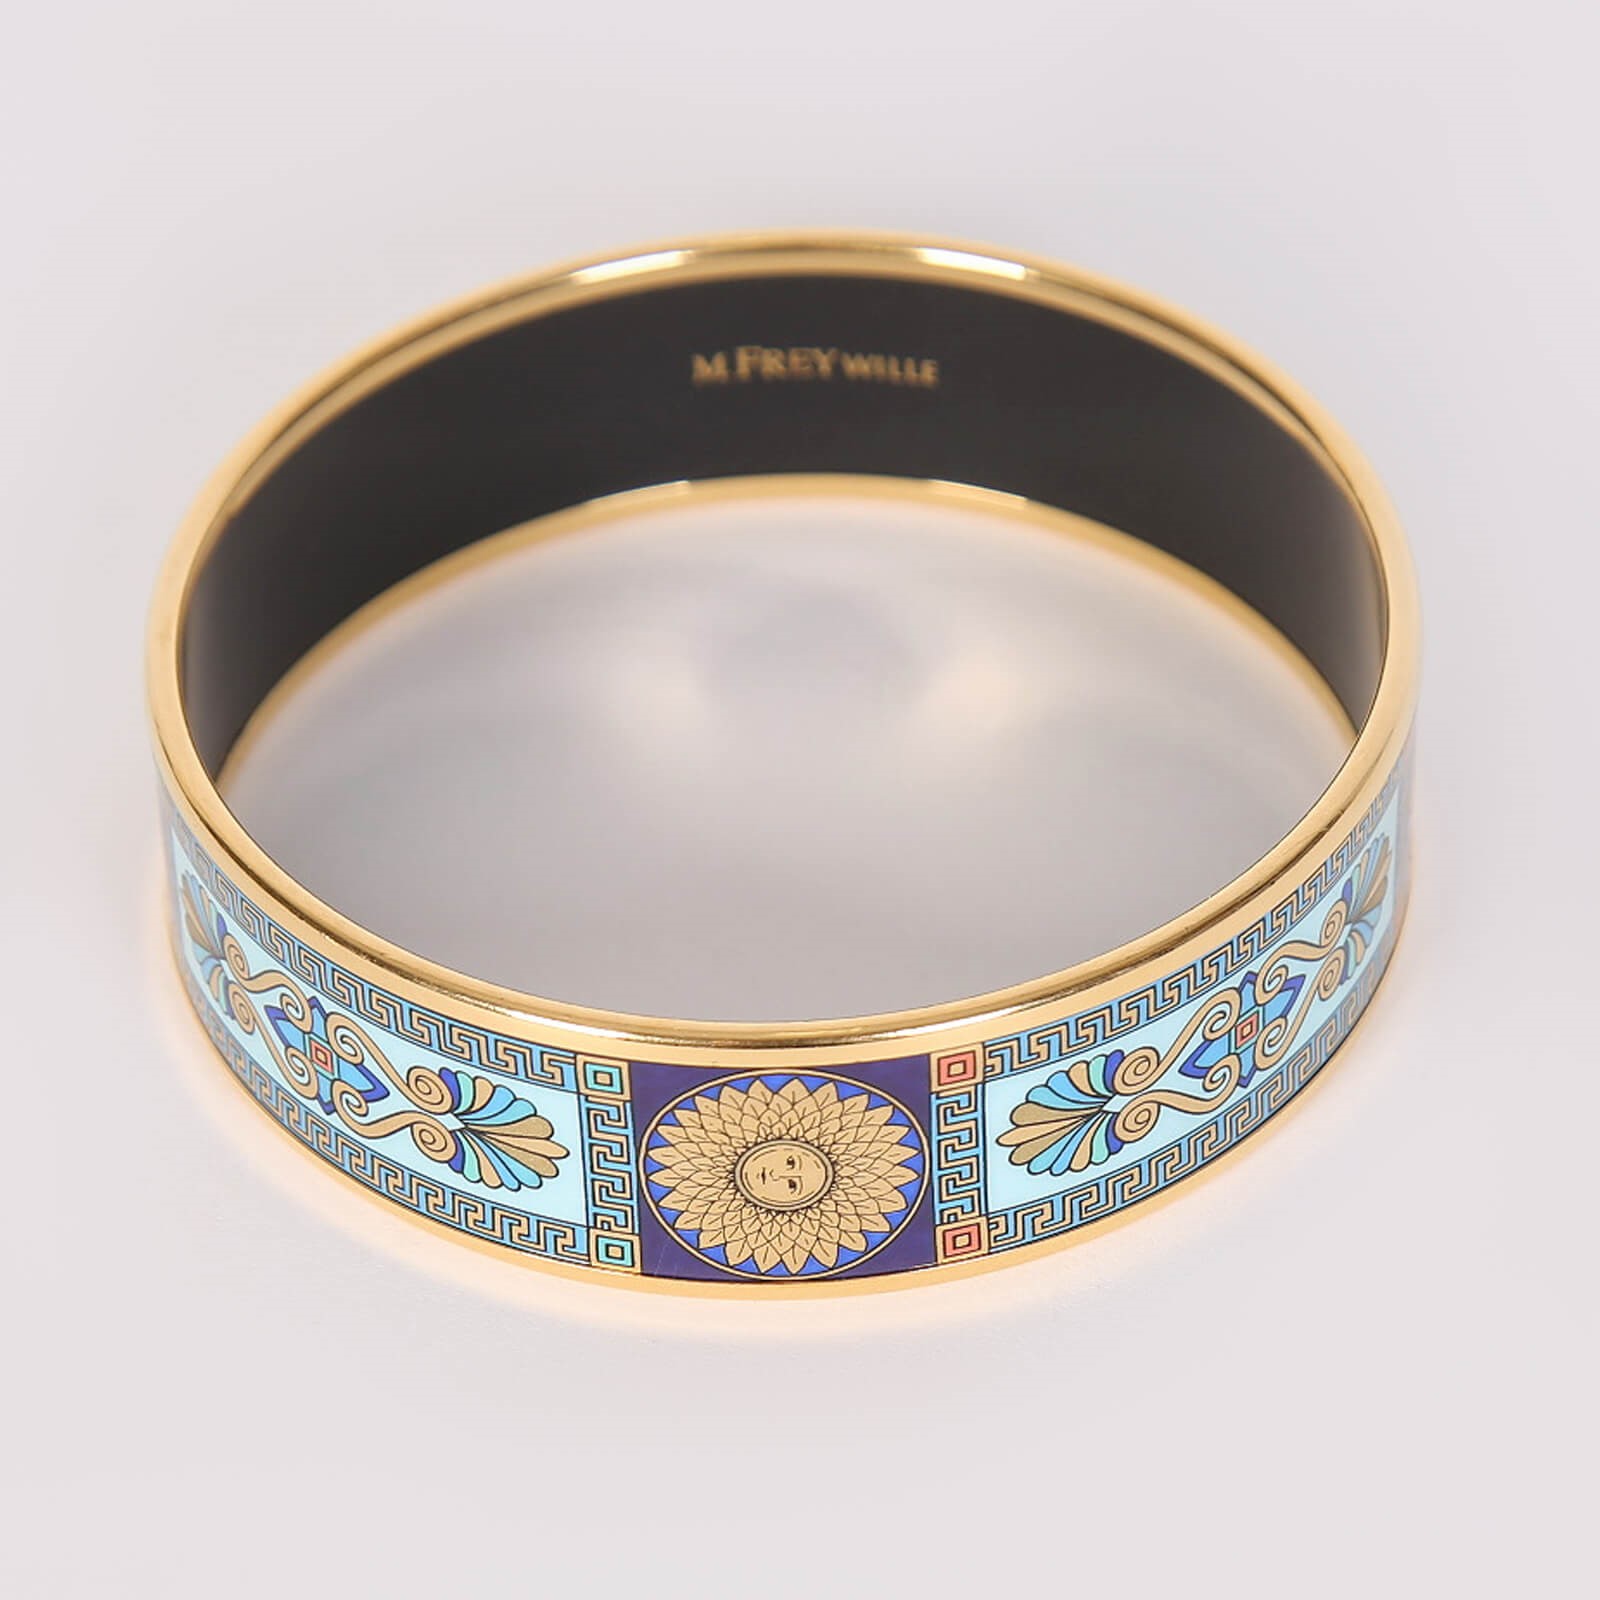 Frey Wille Magic Sphinx Clasp Bangle Ballerina Royal Blue fire enamel 24kt  gold-plated - Inglessis